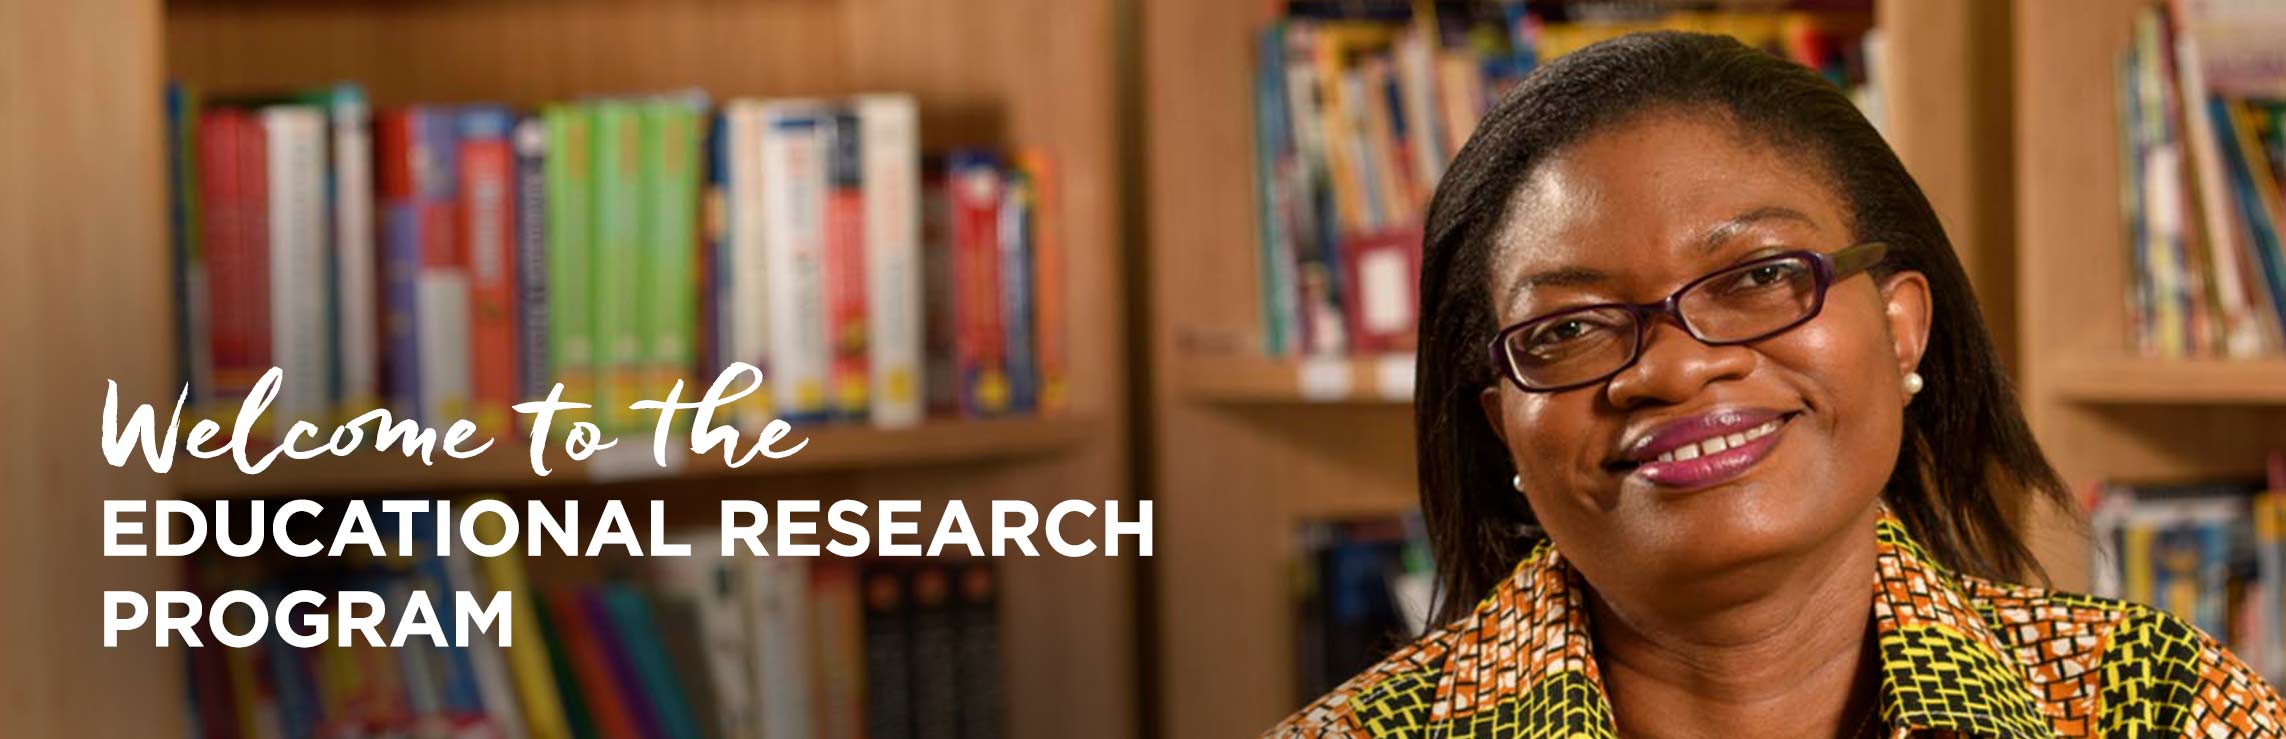 Woman smiling in front of bookshelf, with wording: Welcome to the Educational Research Program